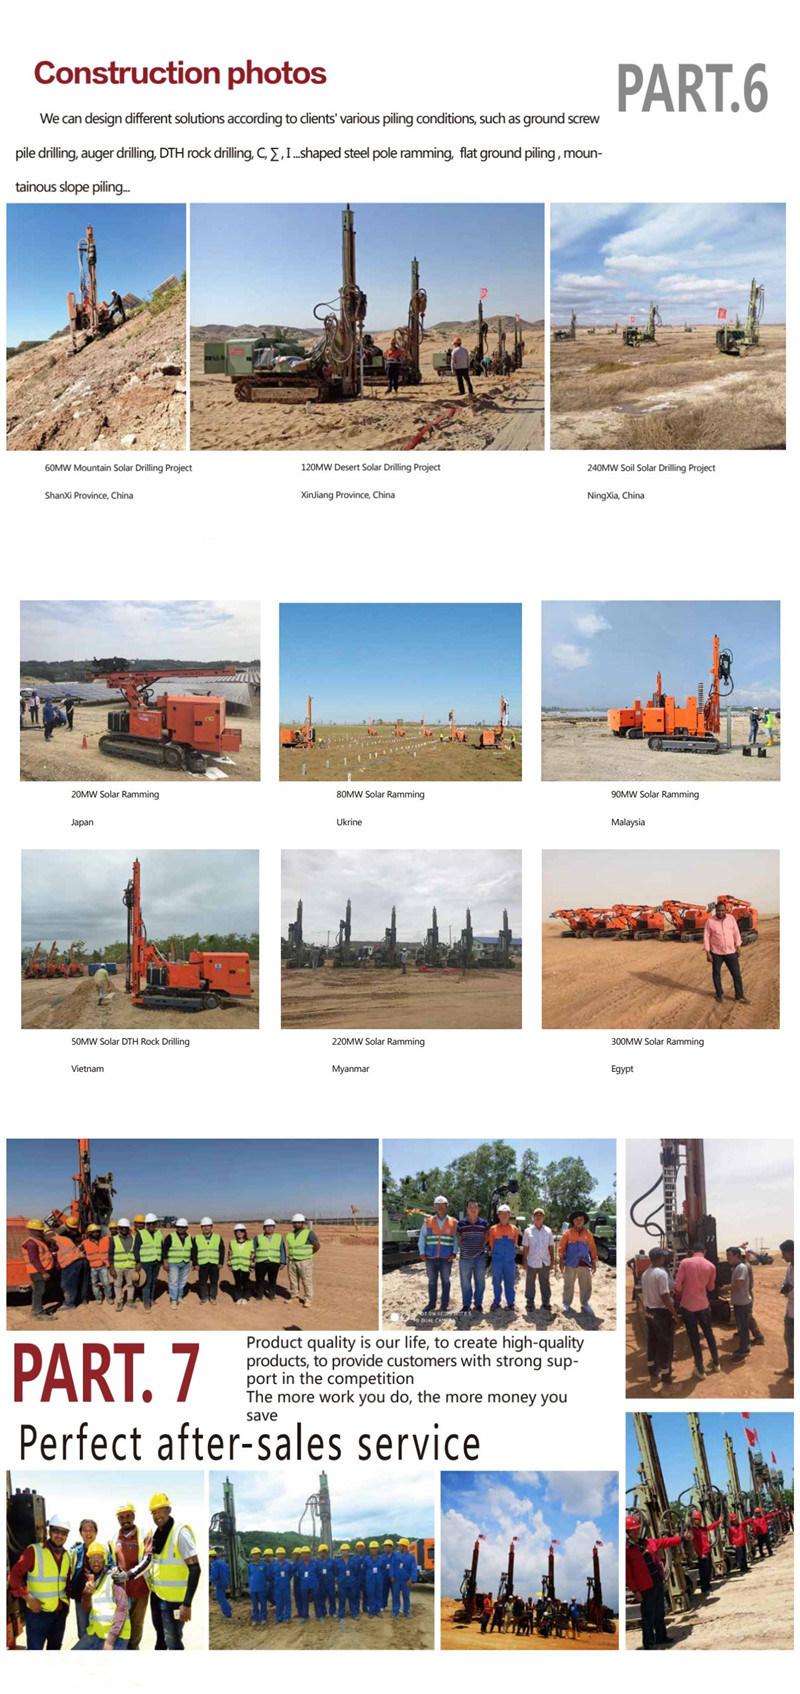 Hammer Hydraulic Static Solar Pile Driver Post Machine with Good Price